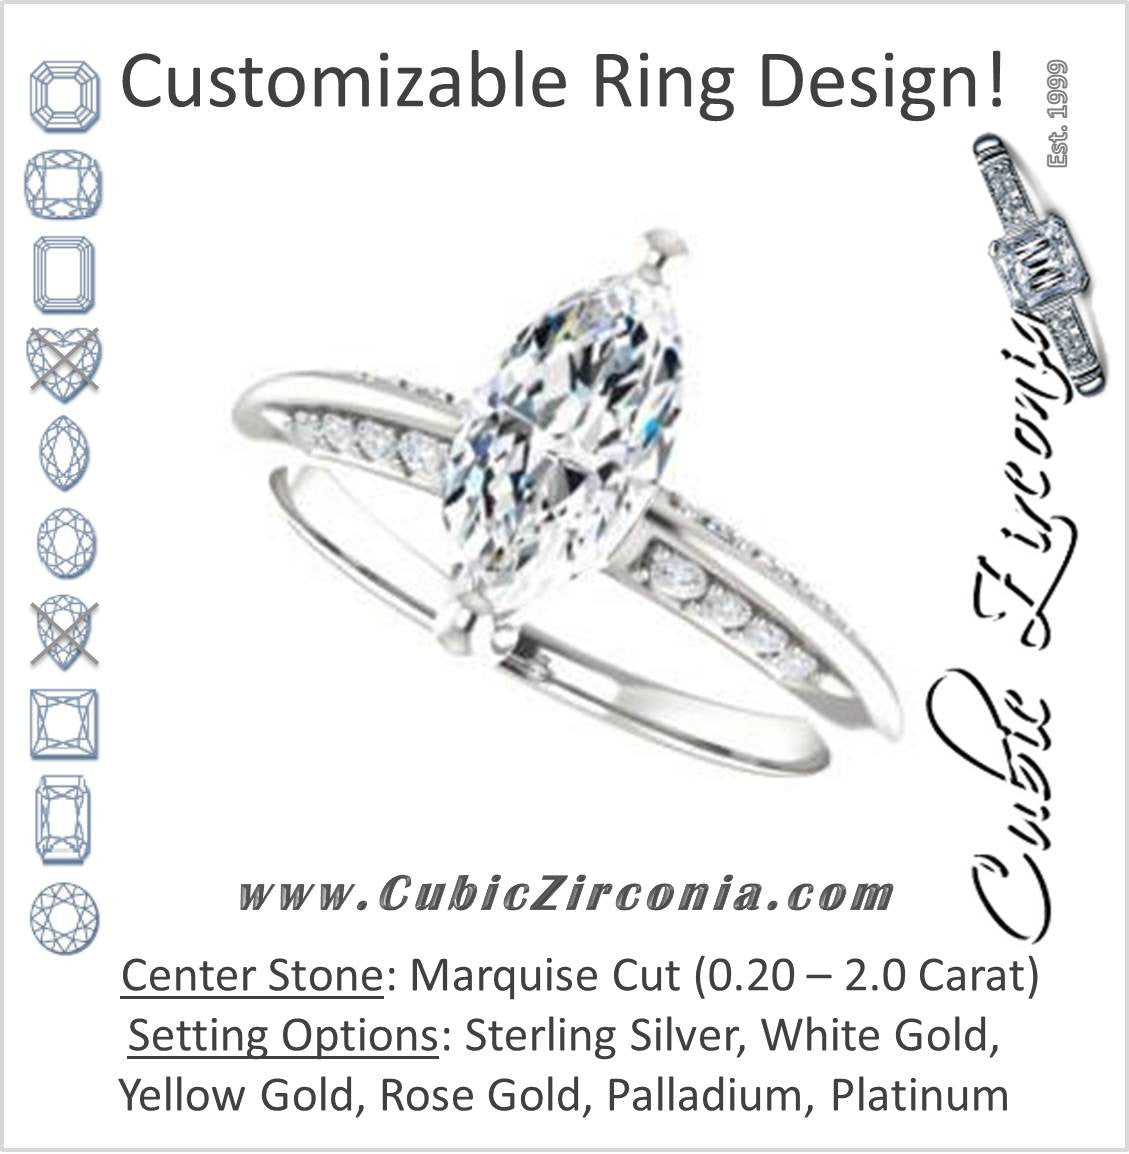 Cubic Zirconia Engagement Ring- The Savannah (Customizable Marquise Cut Artisan Design with Knife-Edged, Inset-Accent 3-sided Band)